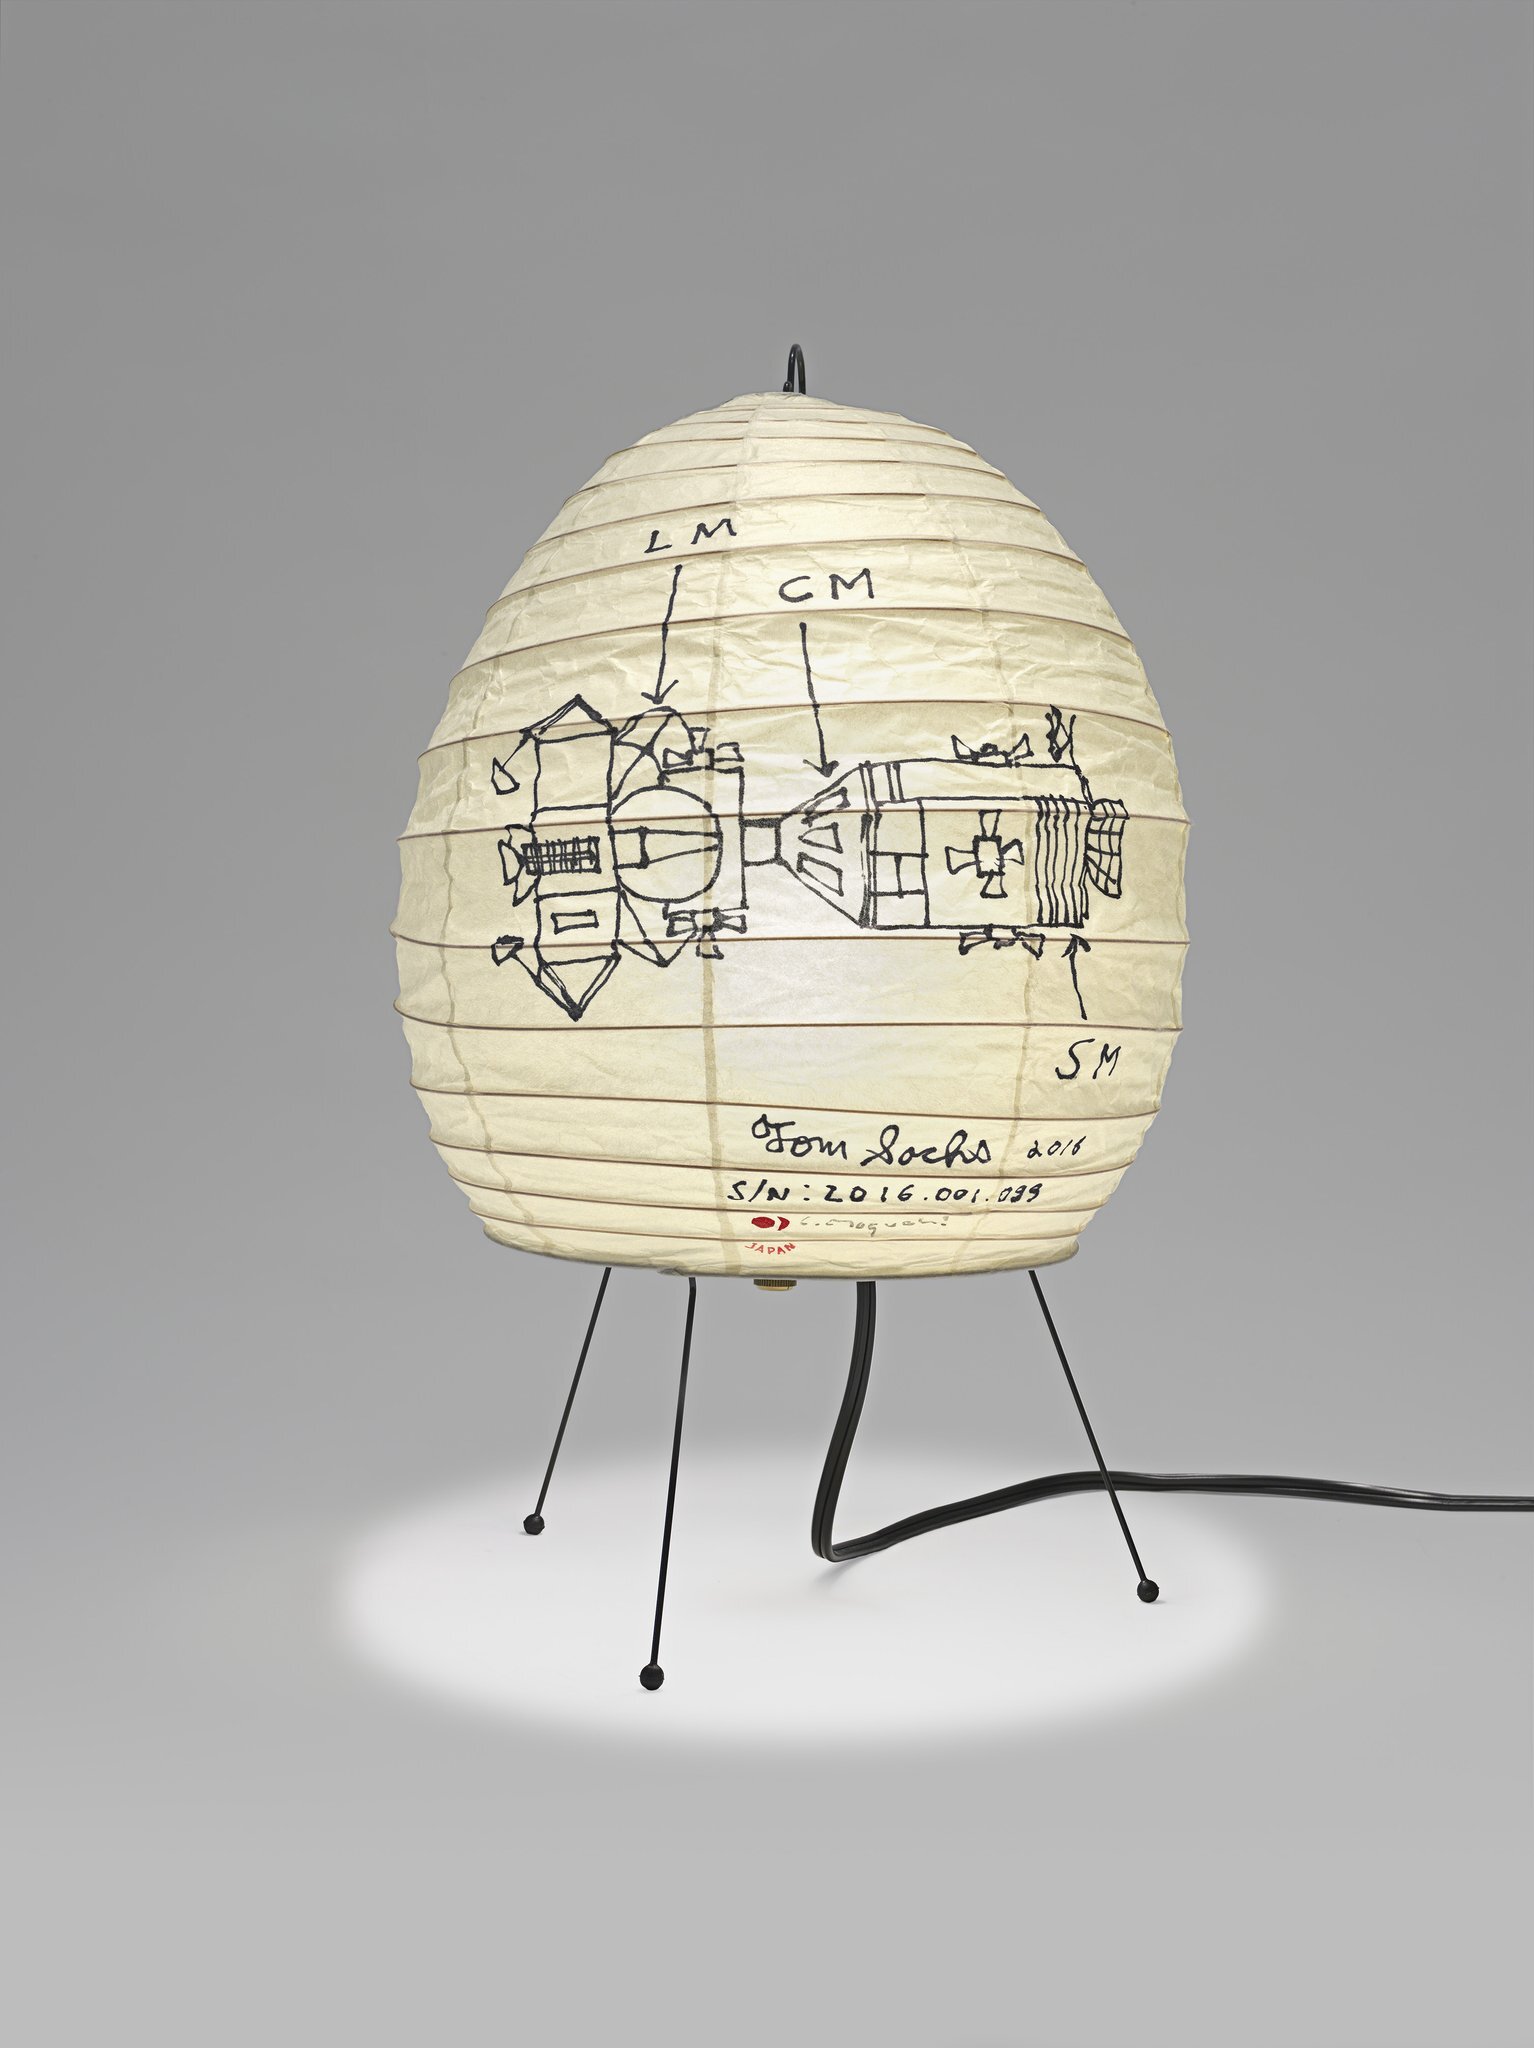  Command Service Module Lamp by Tom Sachs. Source:  Tom Sachs Store     